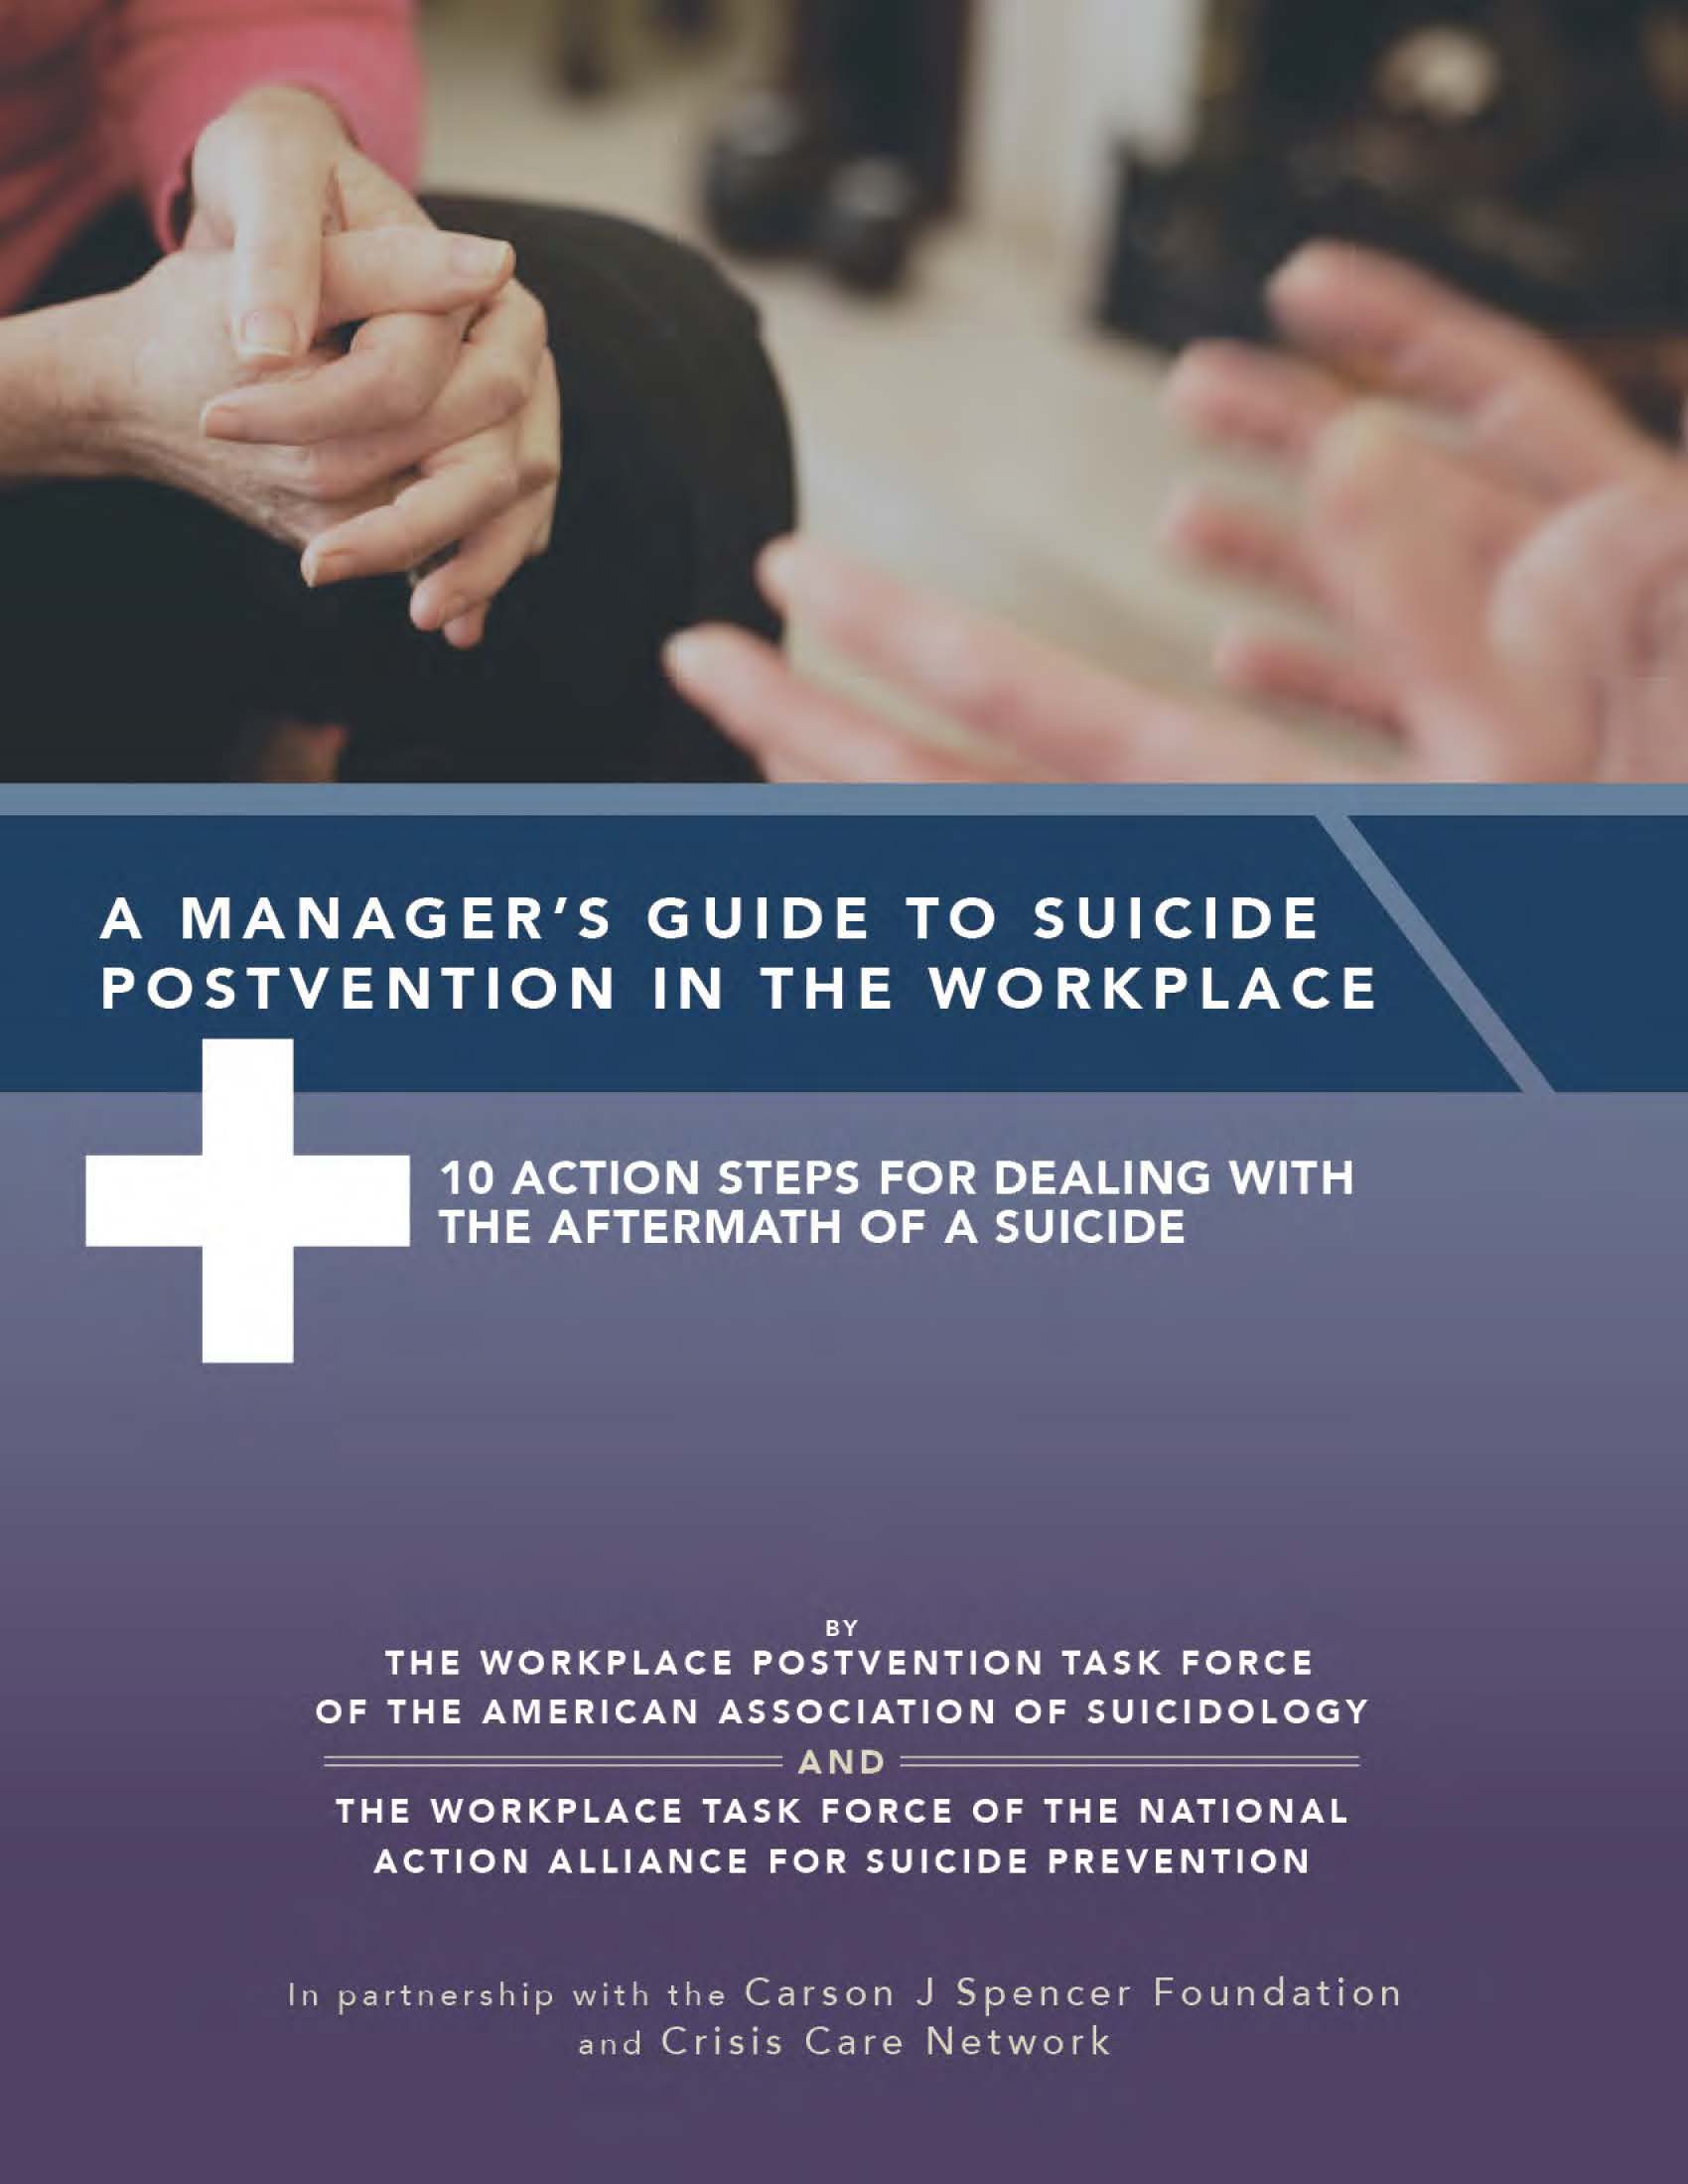 A Manager’s Guide to Suicide Postvention in the Workplace: 10 Action Steps for Dealing with the Aftermath of Suicide